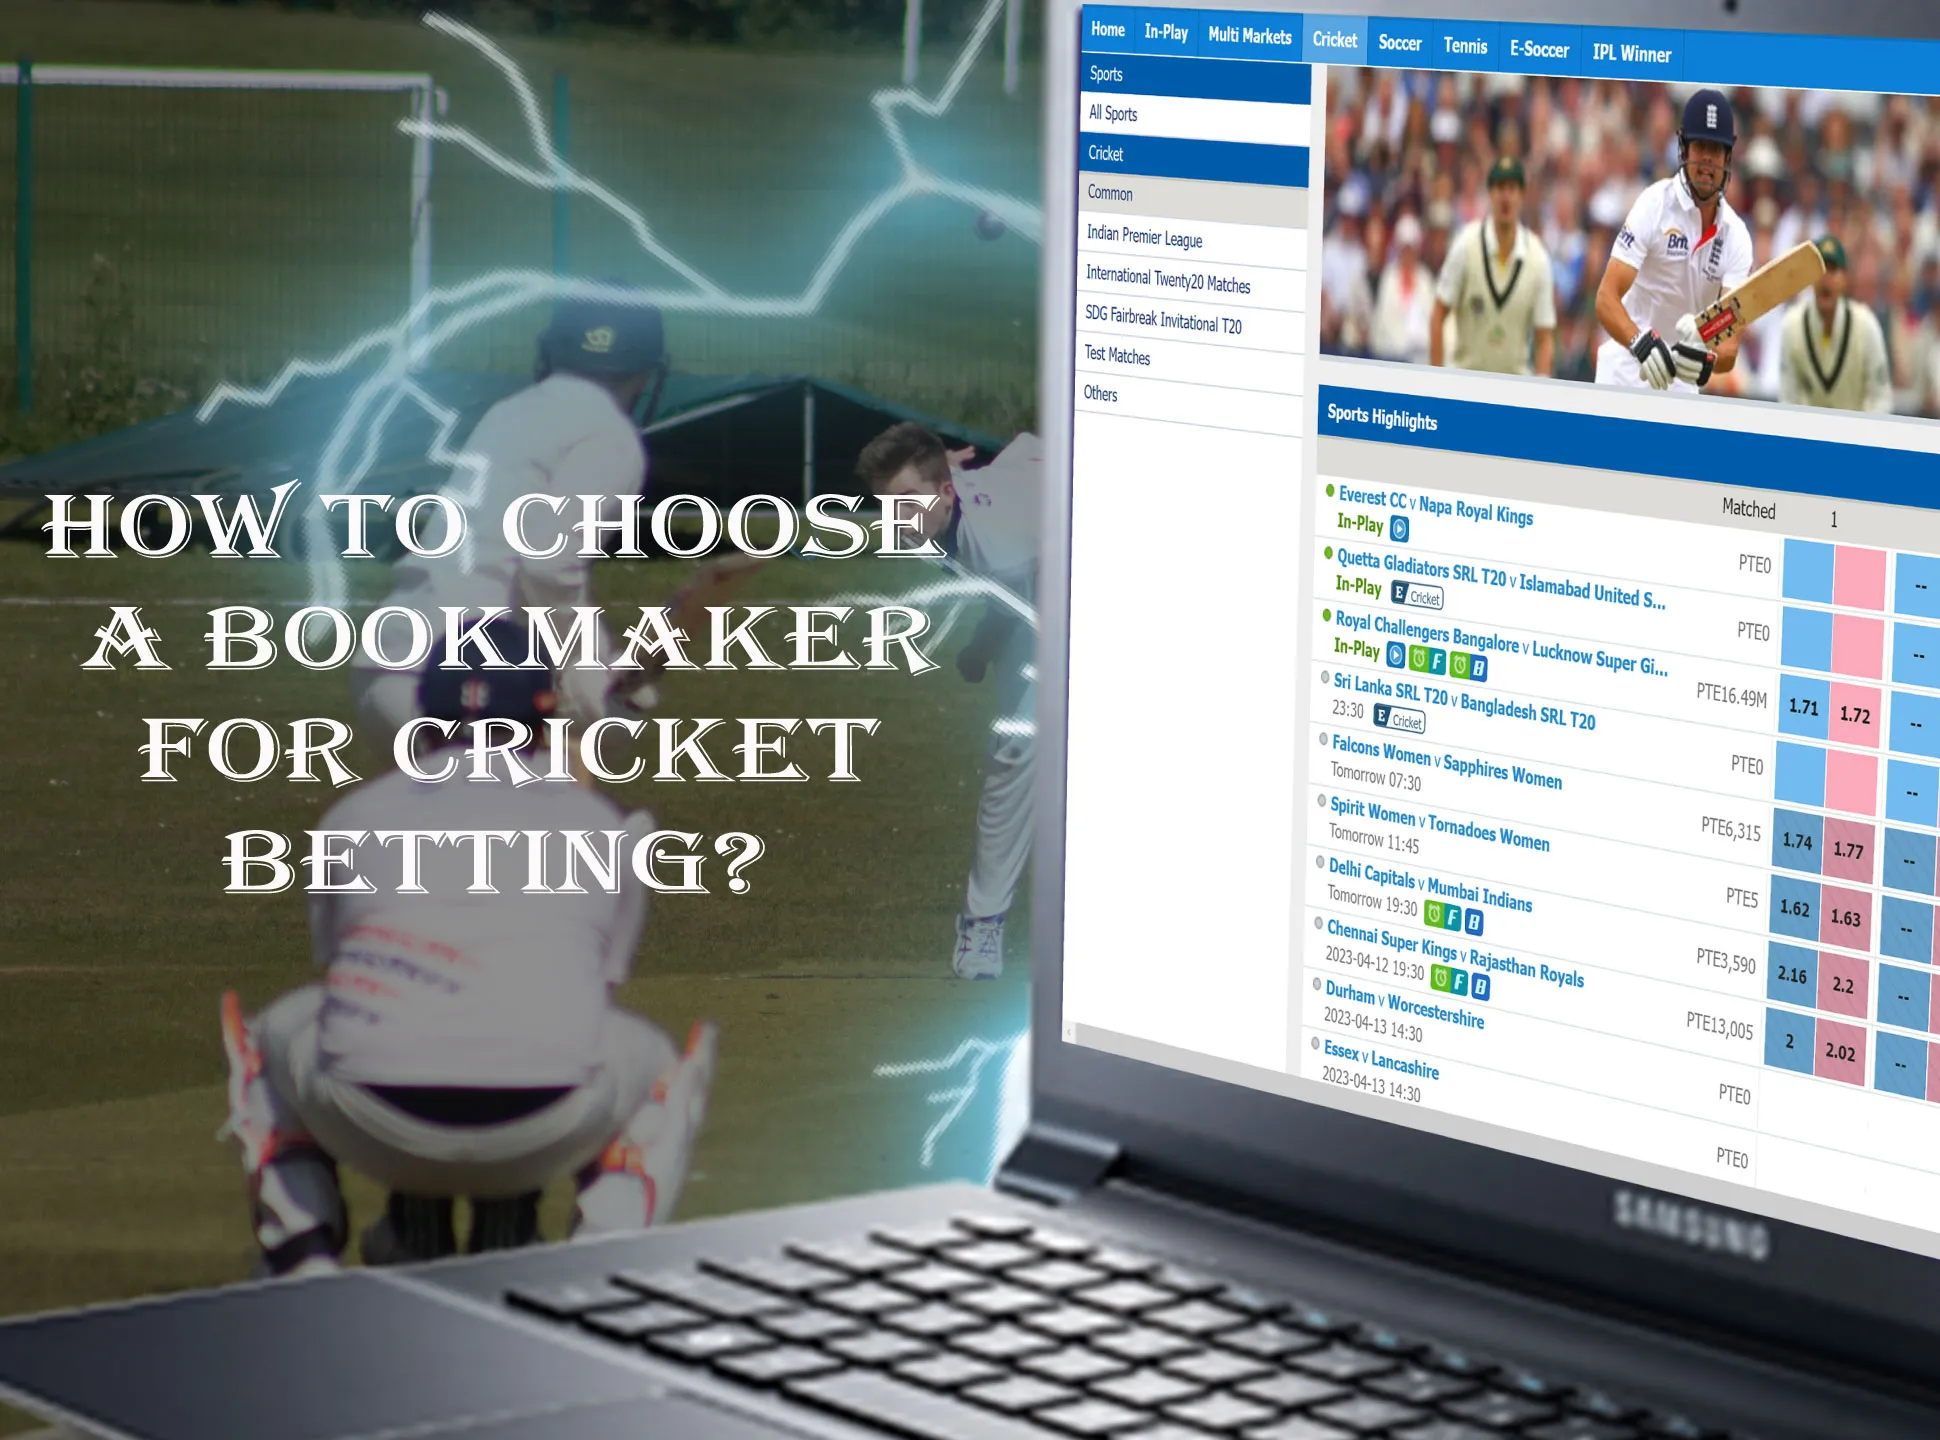 Read our tips before you choose a bookmaker for cricket betting.